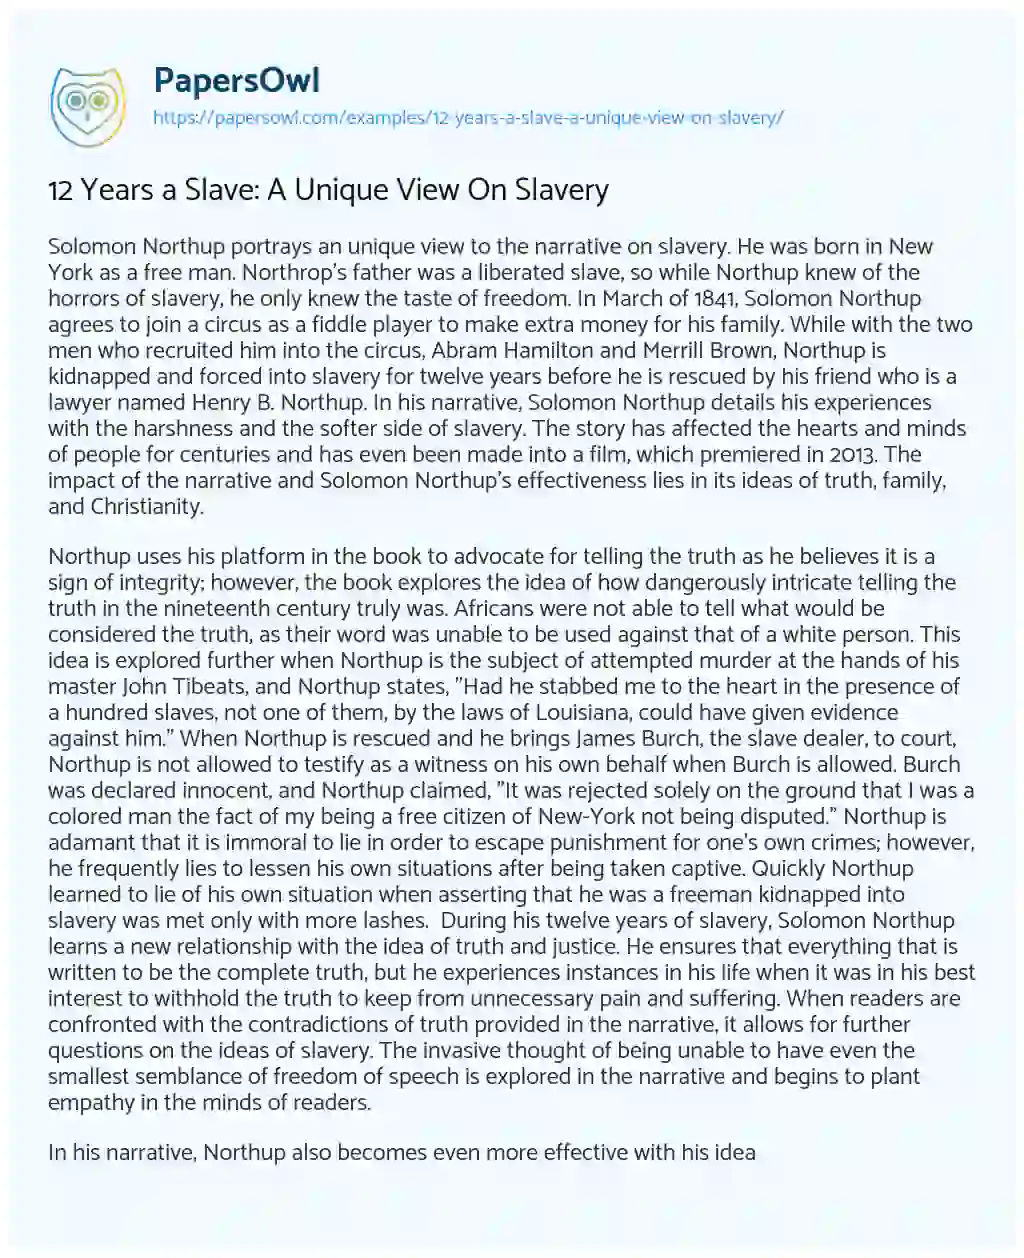 Essay on 12 Years a Slave: a Unique View on Slavery